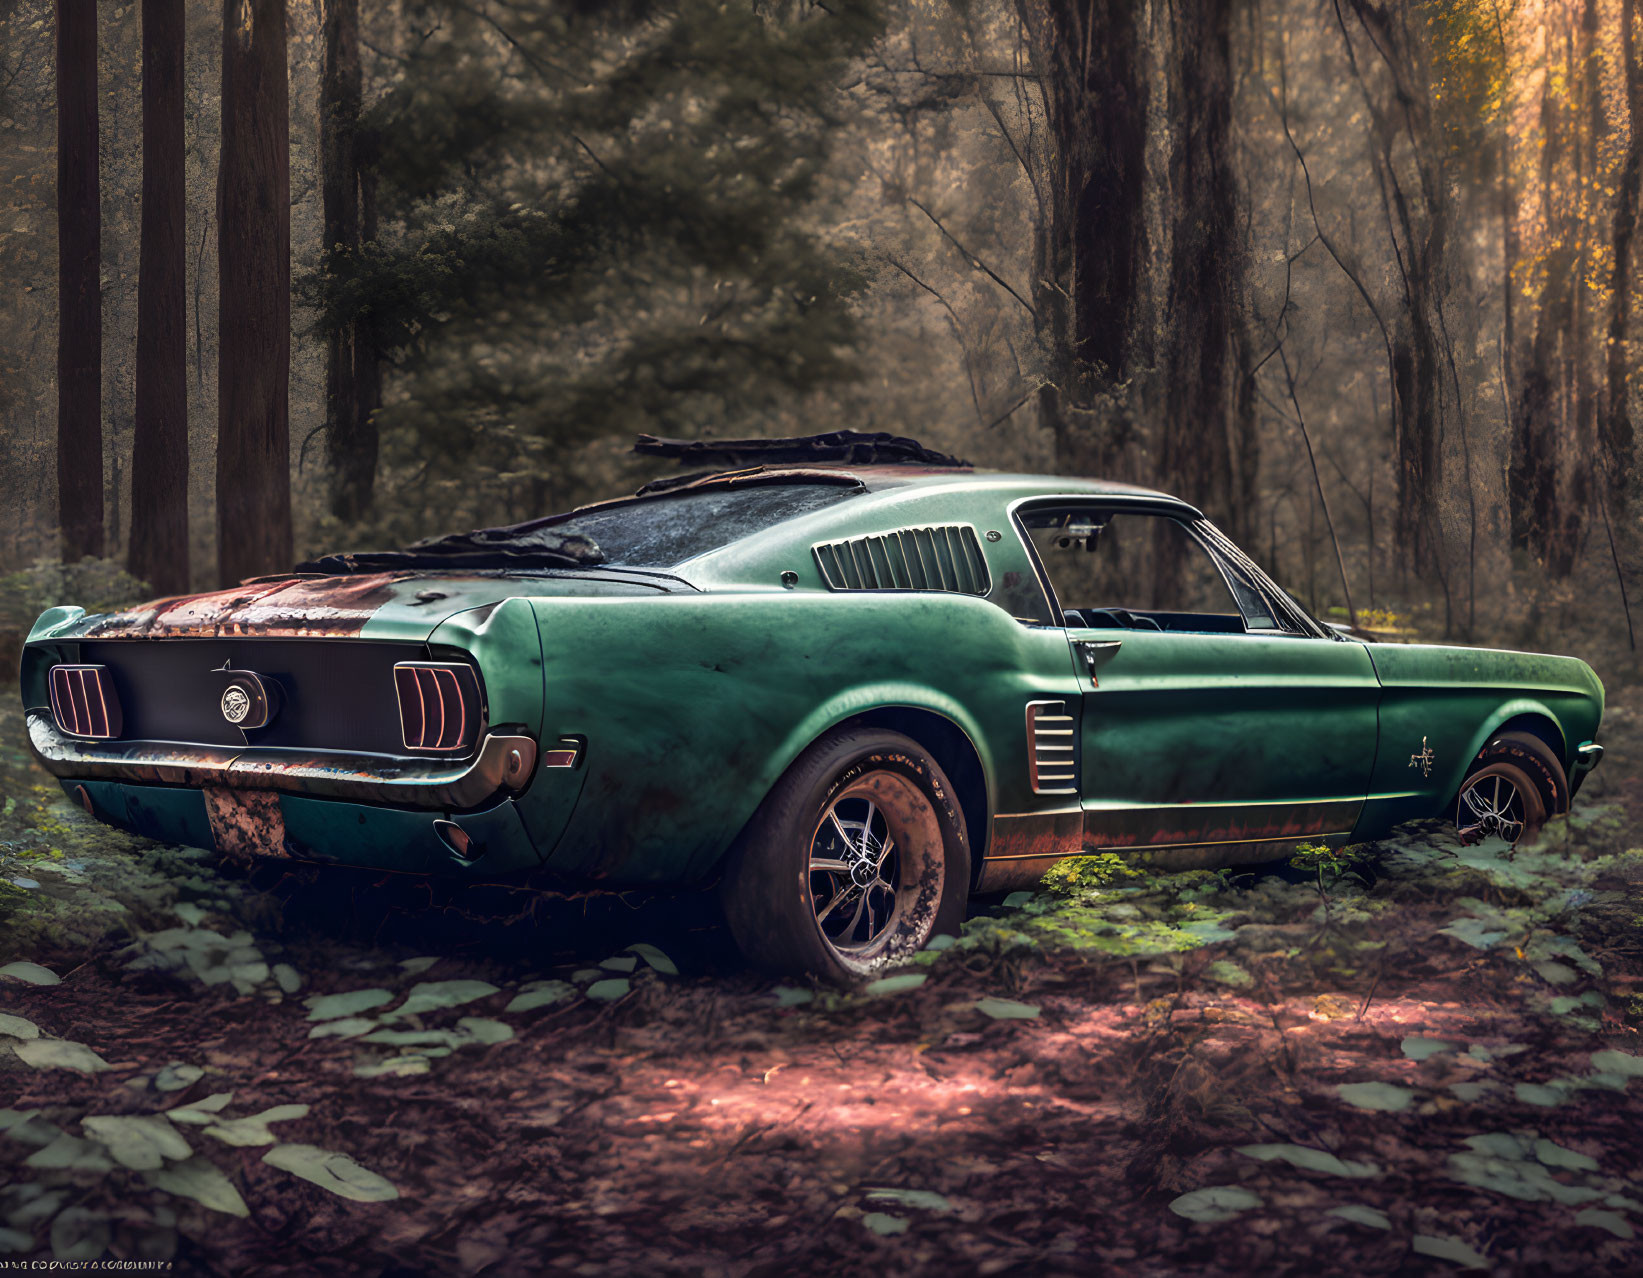 Classic Green Mustang Parked in Forest with Sunlight Filtering Through Trees